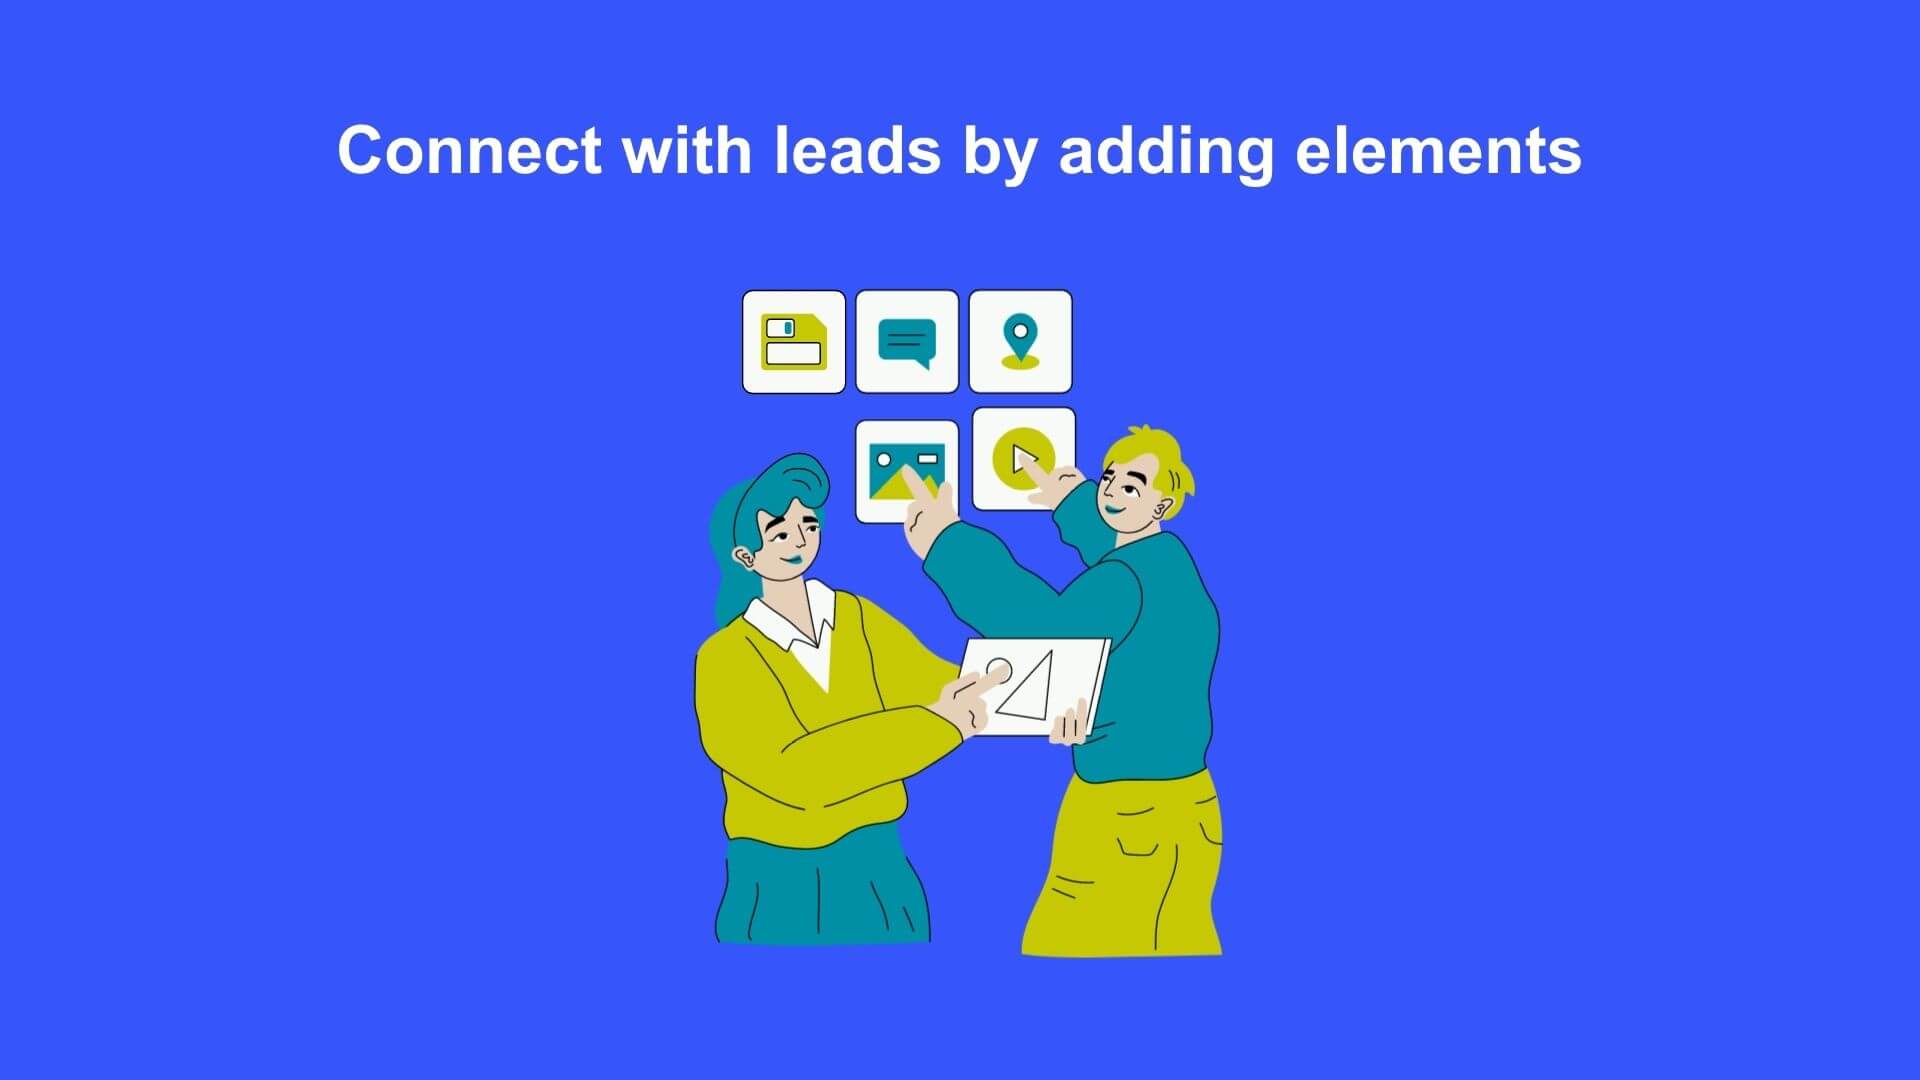 Connect with leads by adding elements